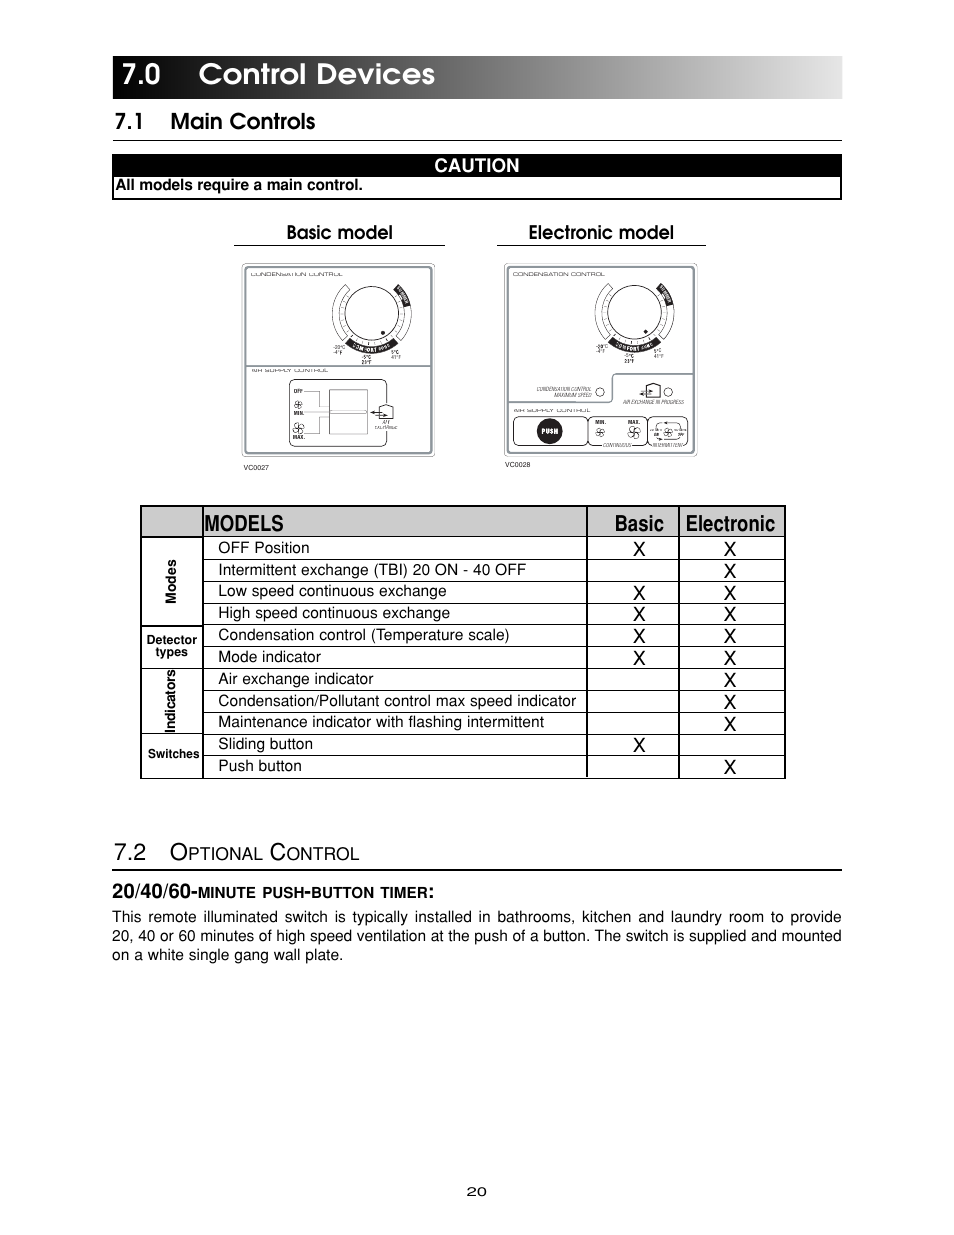 0 control devices, 1 main controls, Models basic electronic | Basic model, Electronic model, Caution, Ptional, Ontrol, Off position, Intermittent exchange (tbi) 20 on - 40 off | Maytag Ventilation Systems HRV-210 User Manual | Page 20 / 32